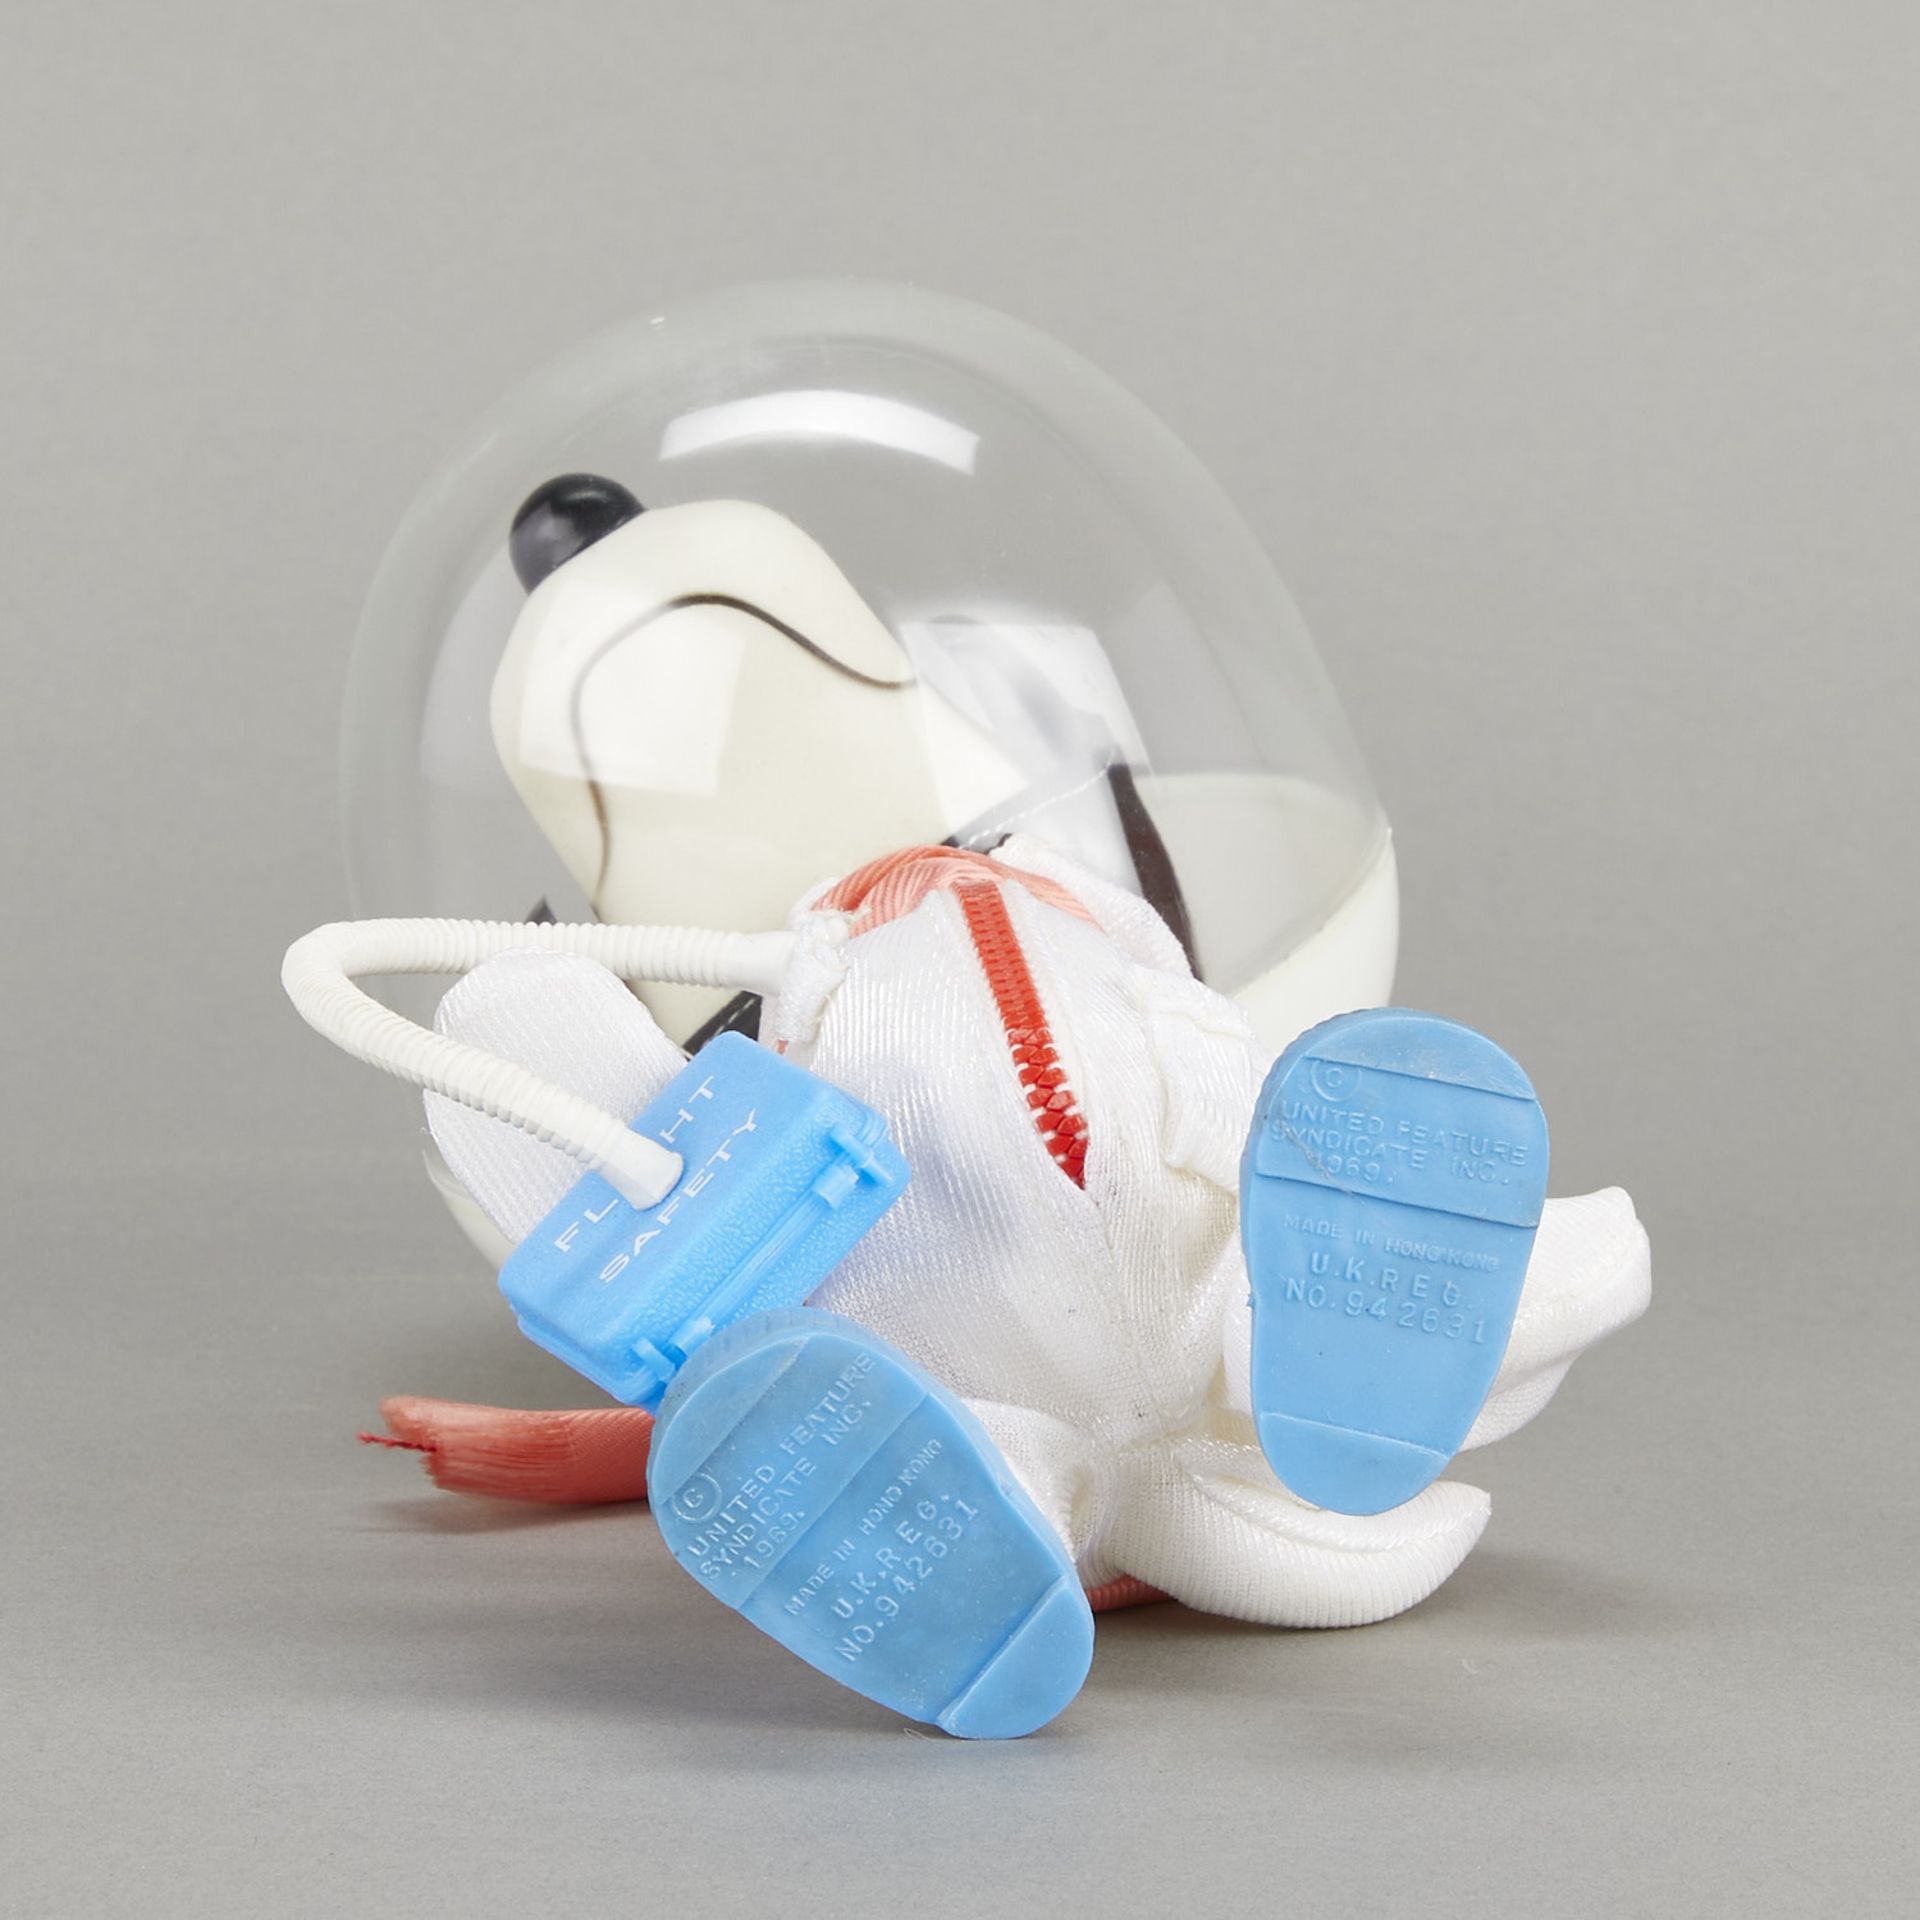 Snoopy Astronaut Pocket Doll with Box - Image 6 of 14